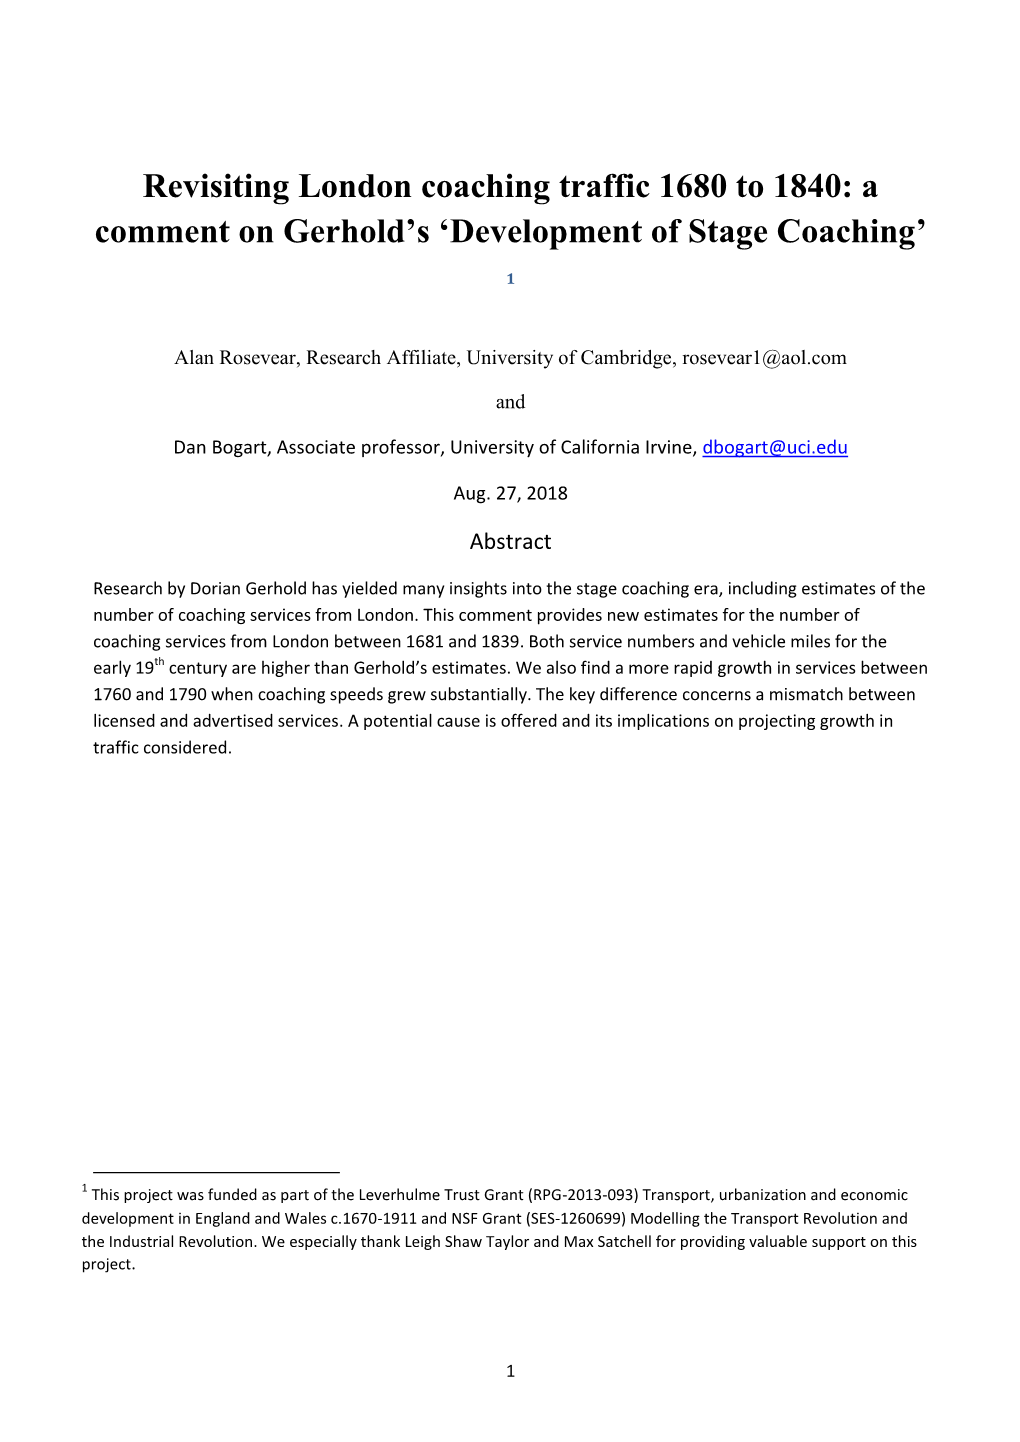 Revisiting London Coaching Traffic 1680 to 1840: a Comment on Gerhold’S ‘Development of Stage Coaching’ 1